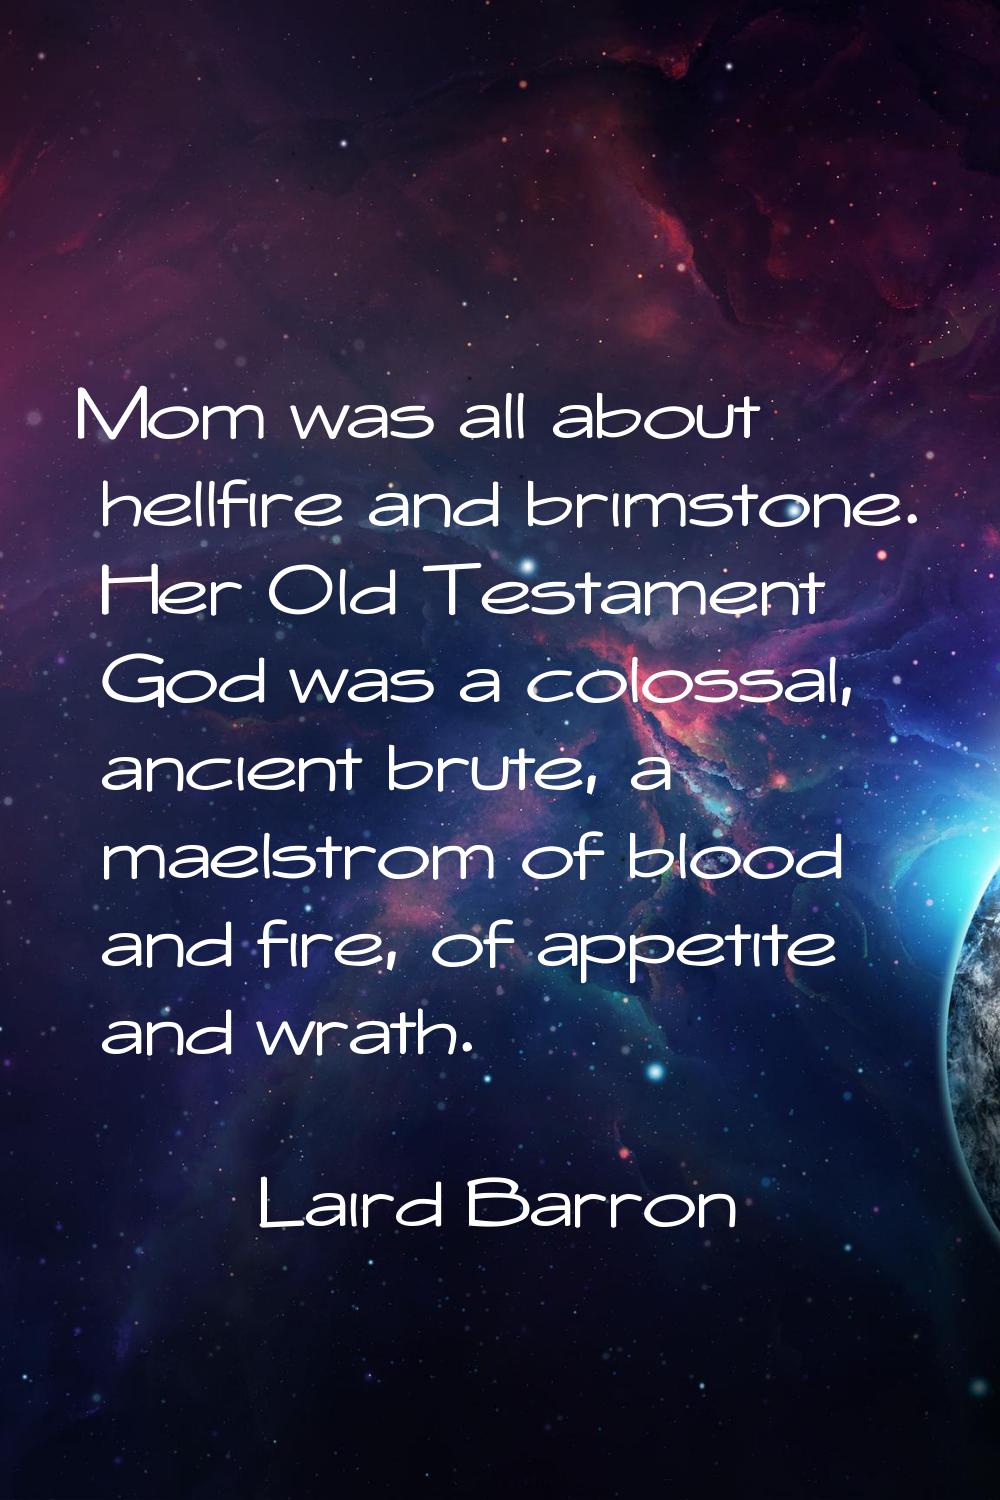 Mom was all about hellfire and brimstone. Her Old Testament God was a colossal, ancient brute, a ma